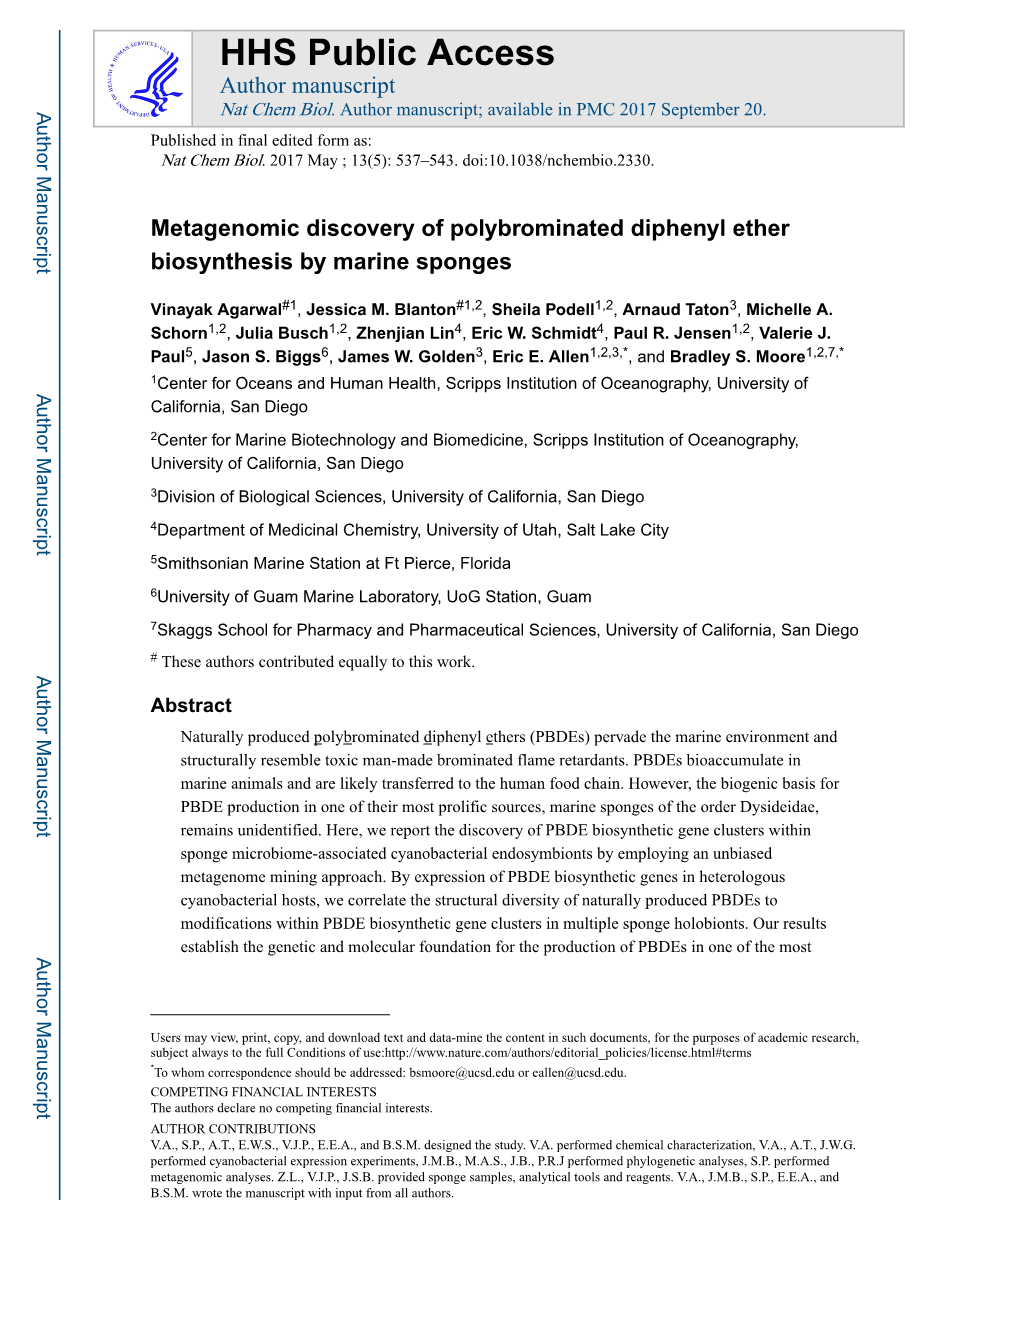 Metagenomic Discovery of Polybrominated Diphenyl Ether Biosynthesis by Marine Sponges